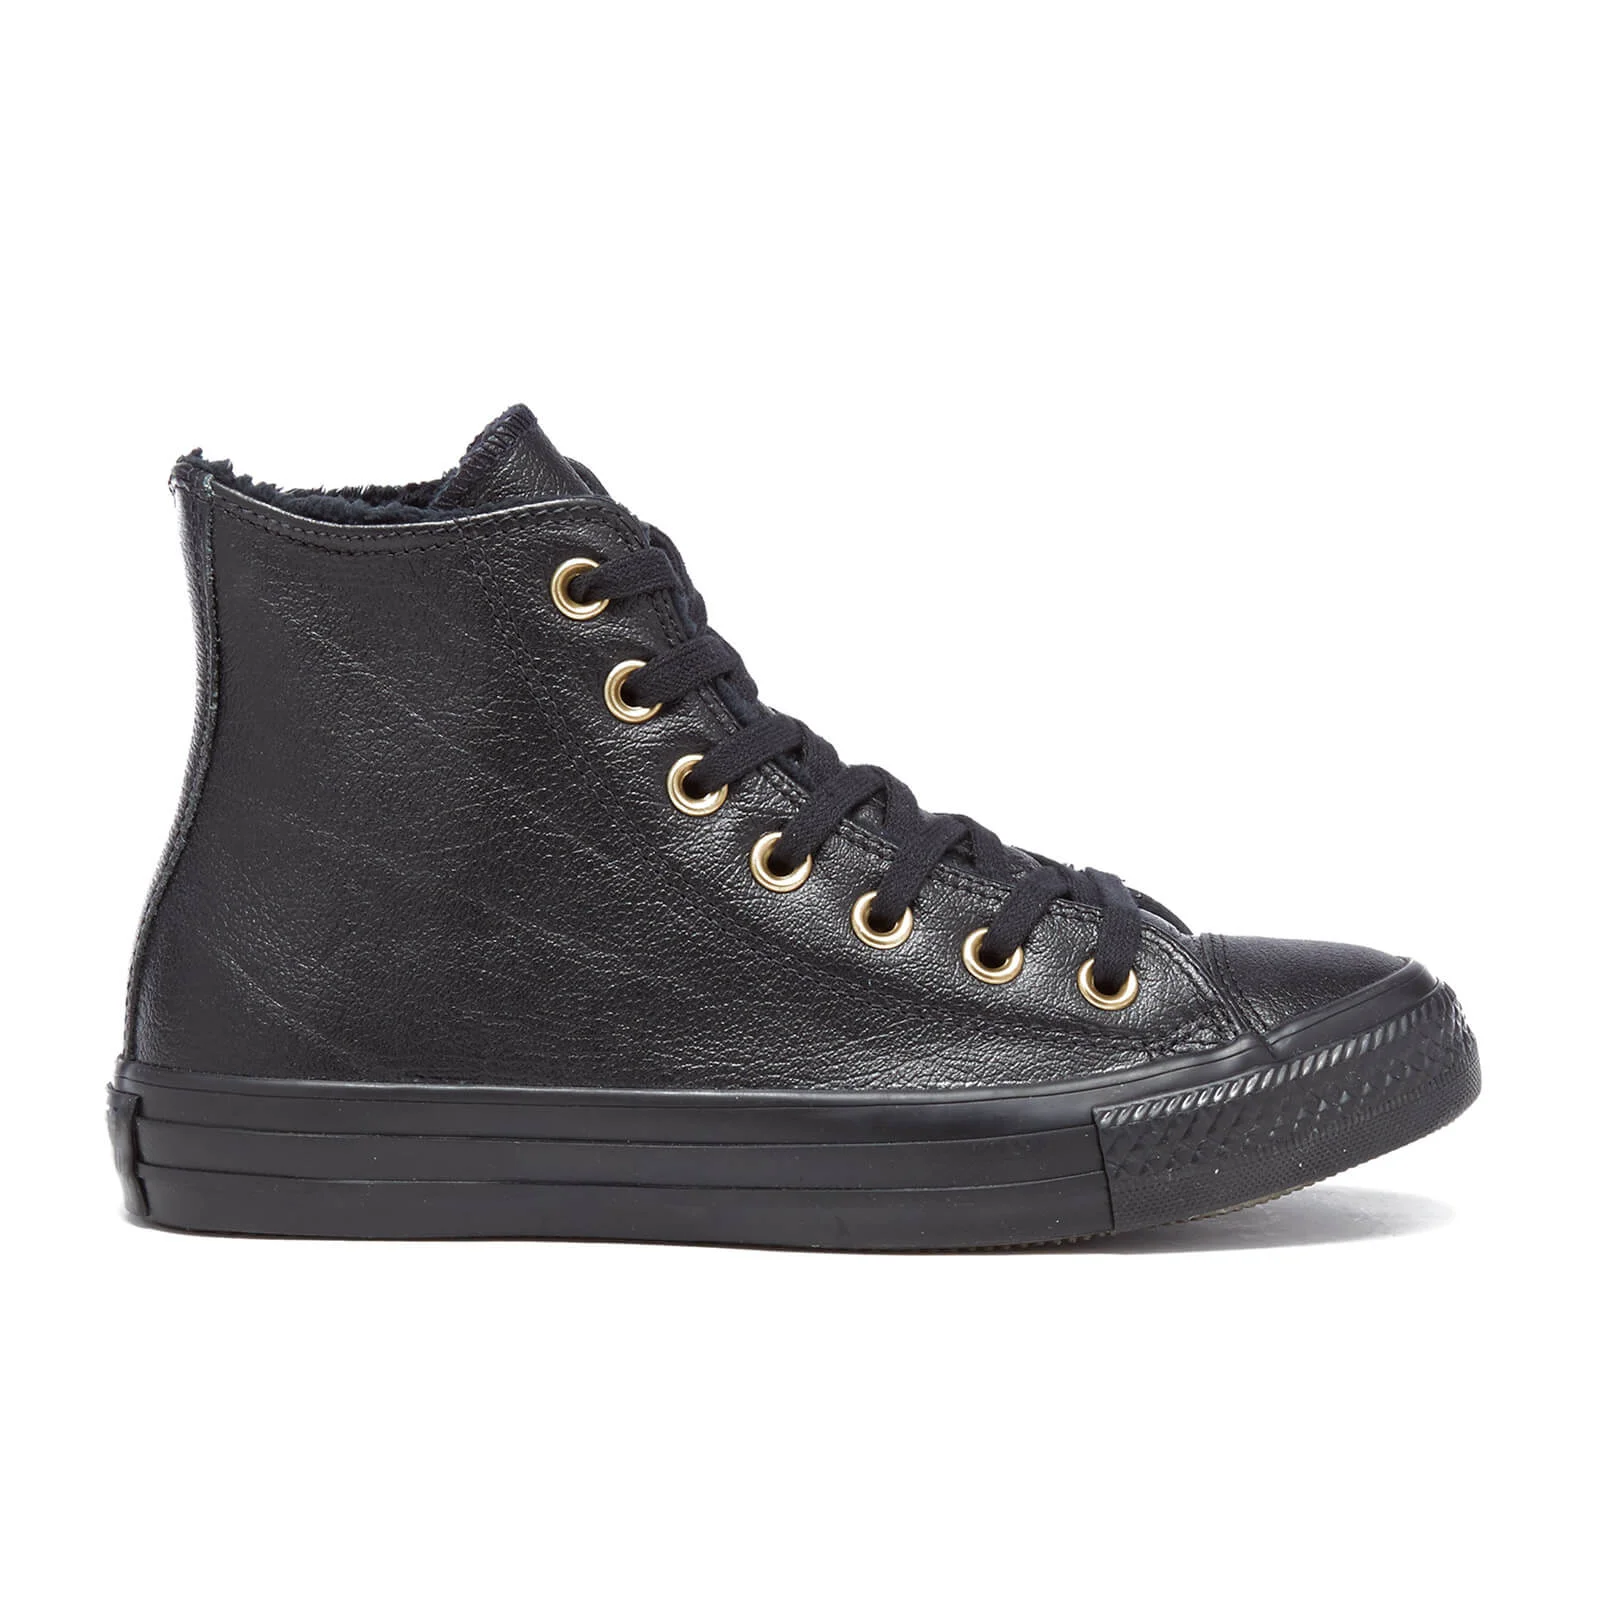 Converse Women's Chuck Taylor All Star Leather Fur Hi-Top Trainers - Black/Black Image 1